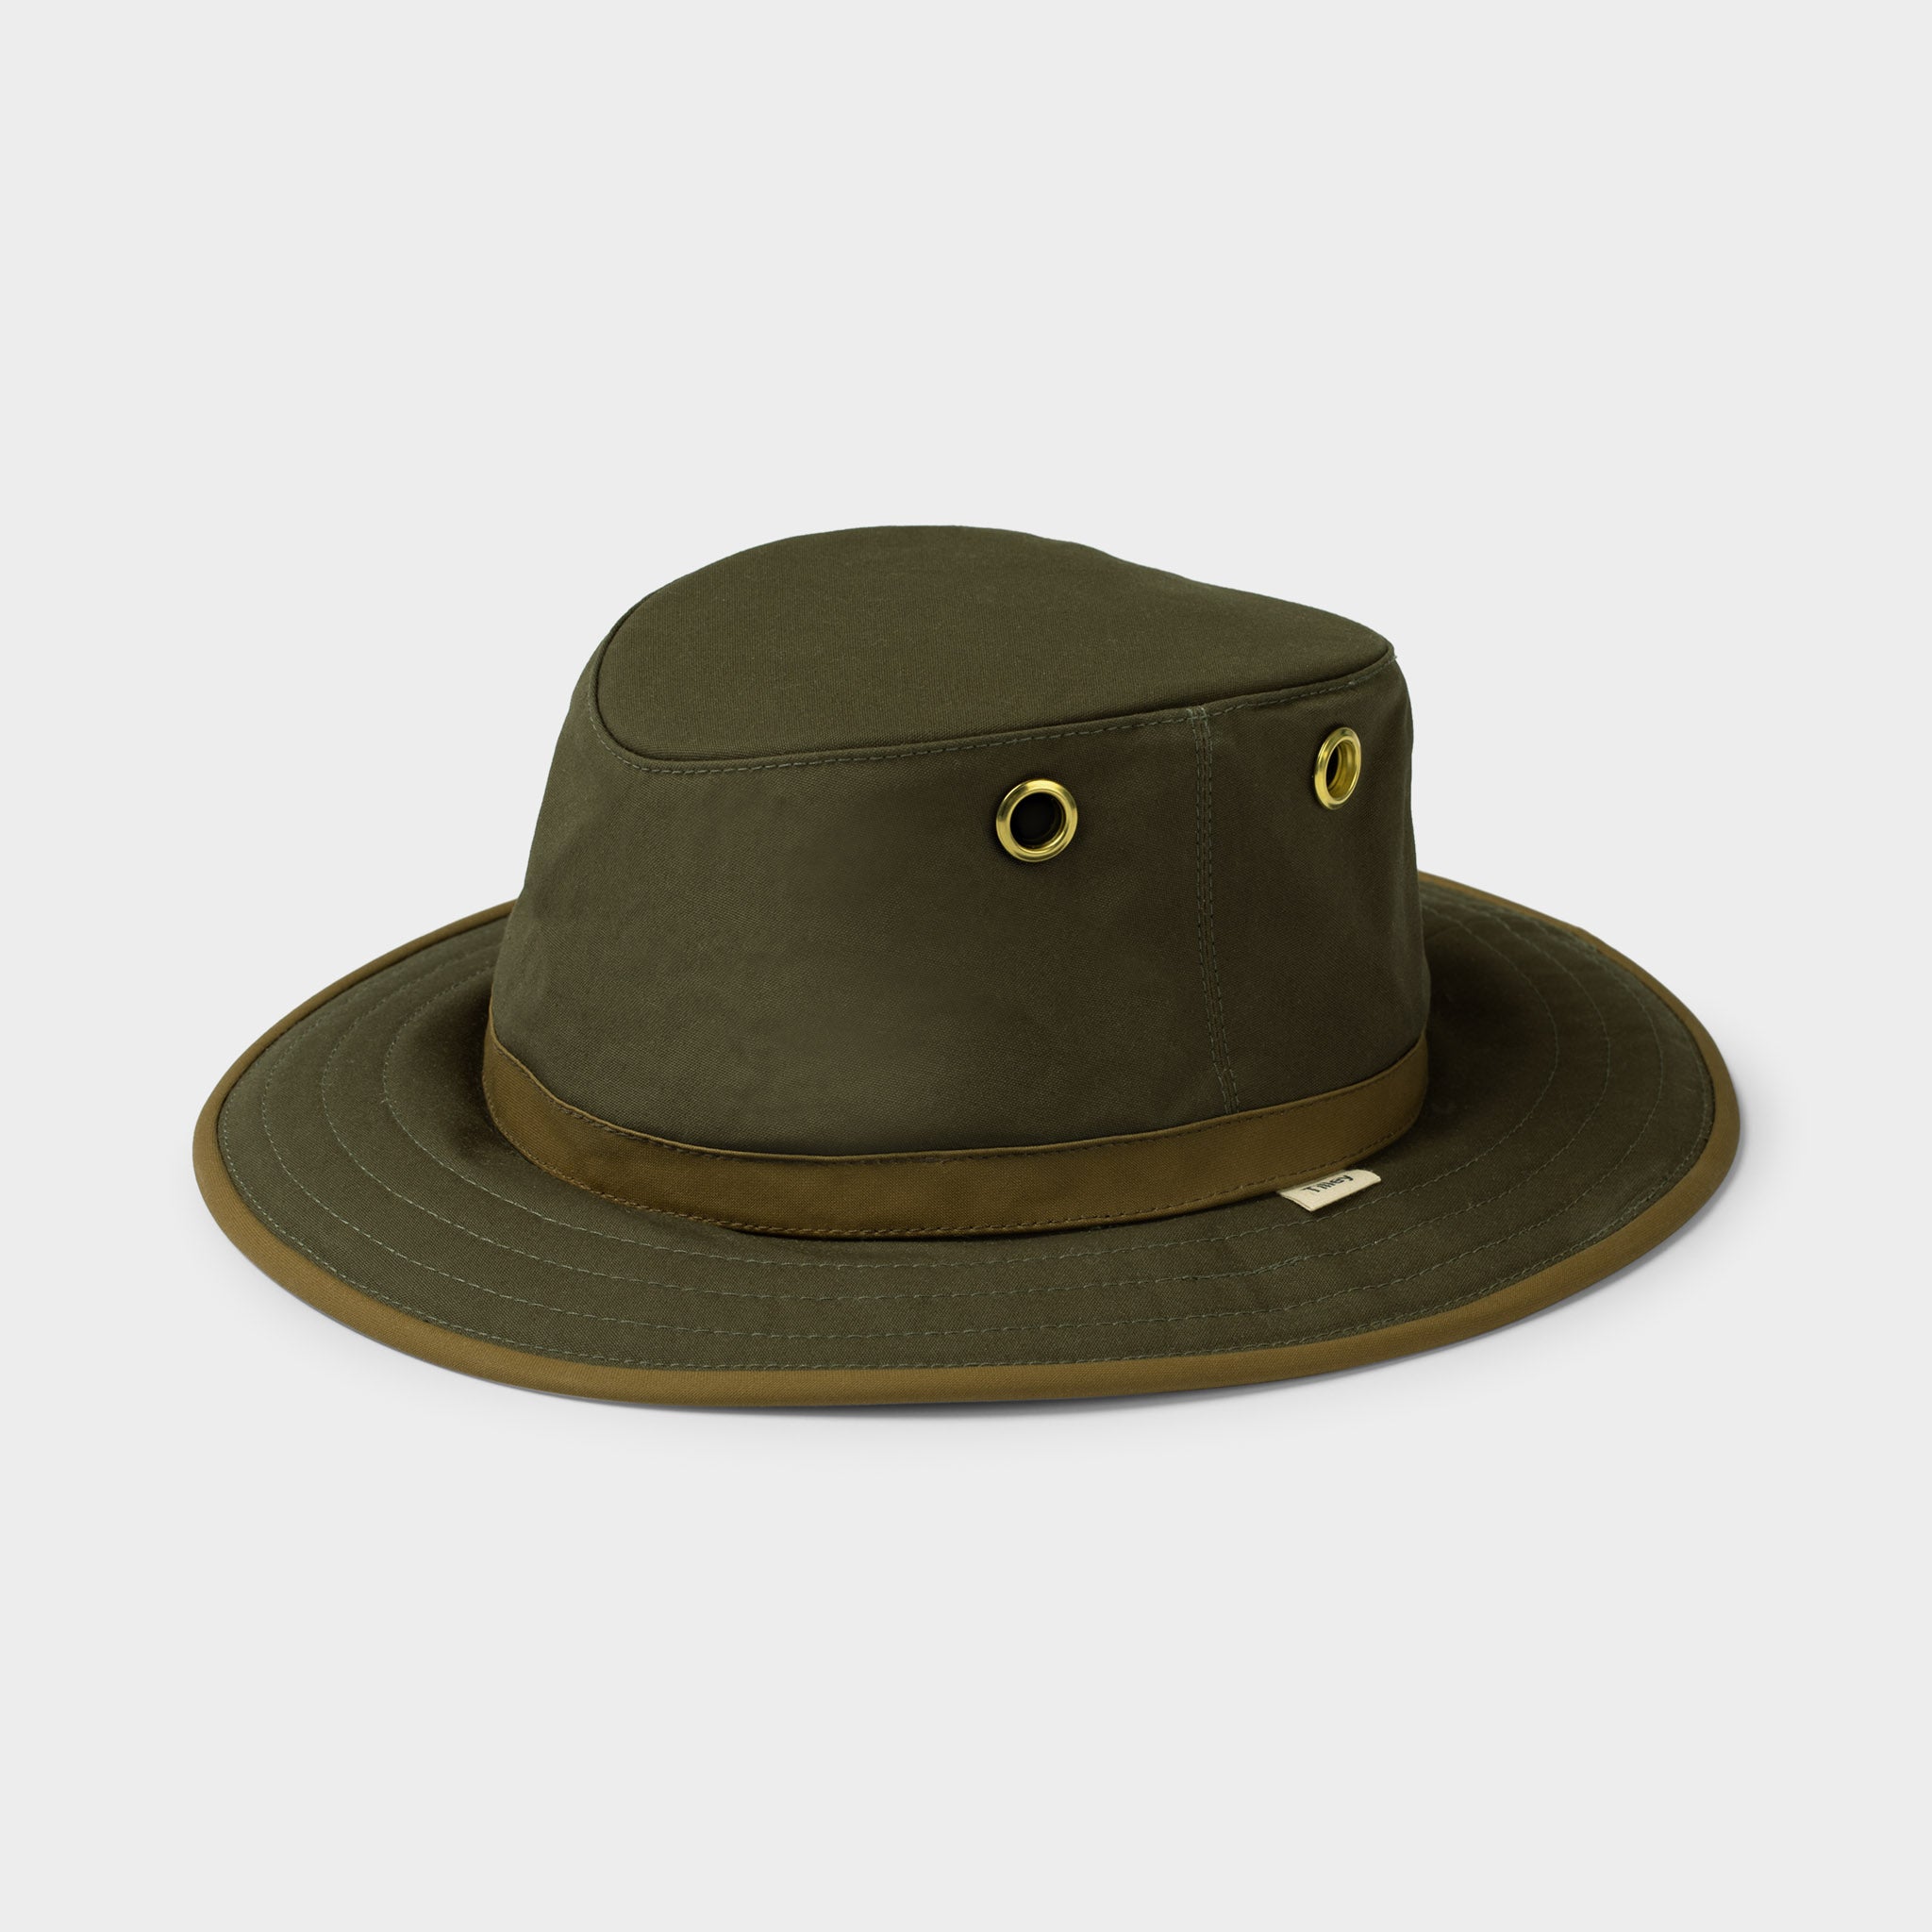 TWC7 Outback Waxed Cotton Hat